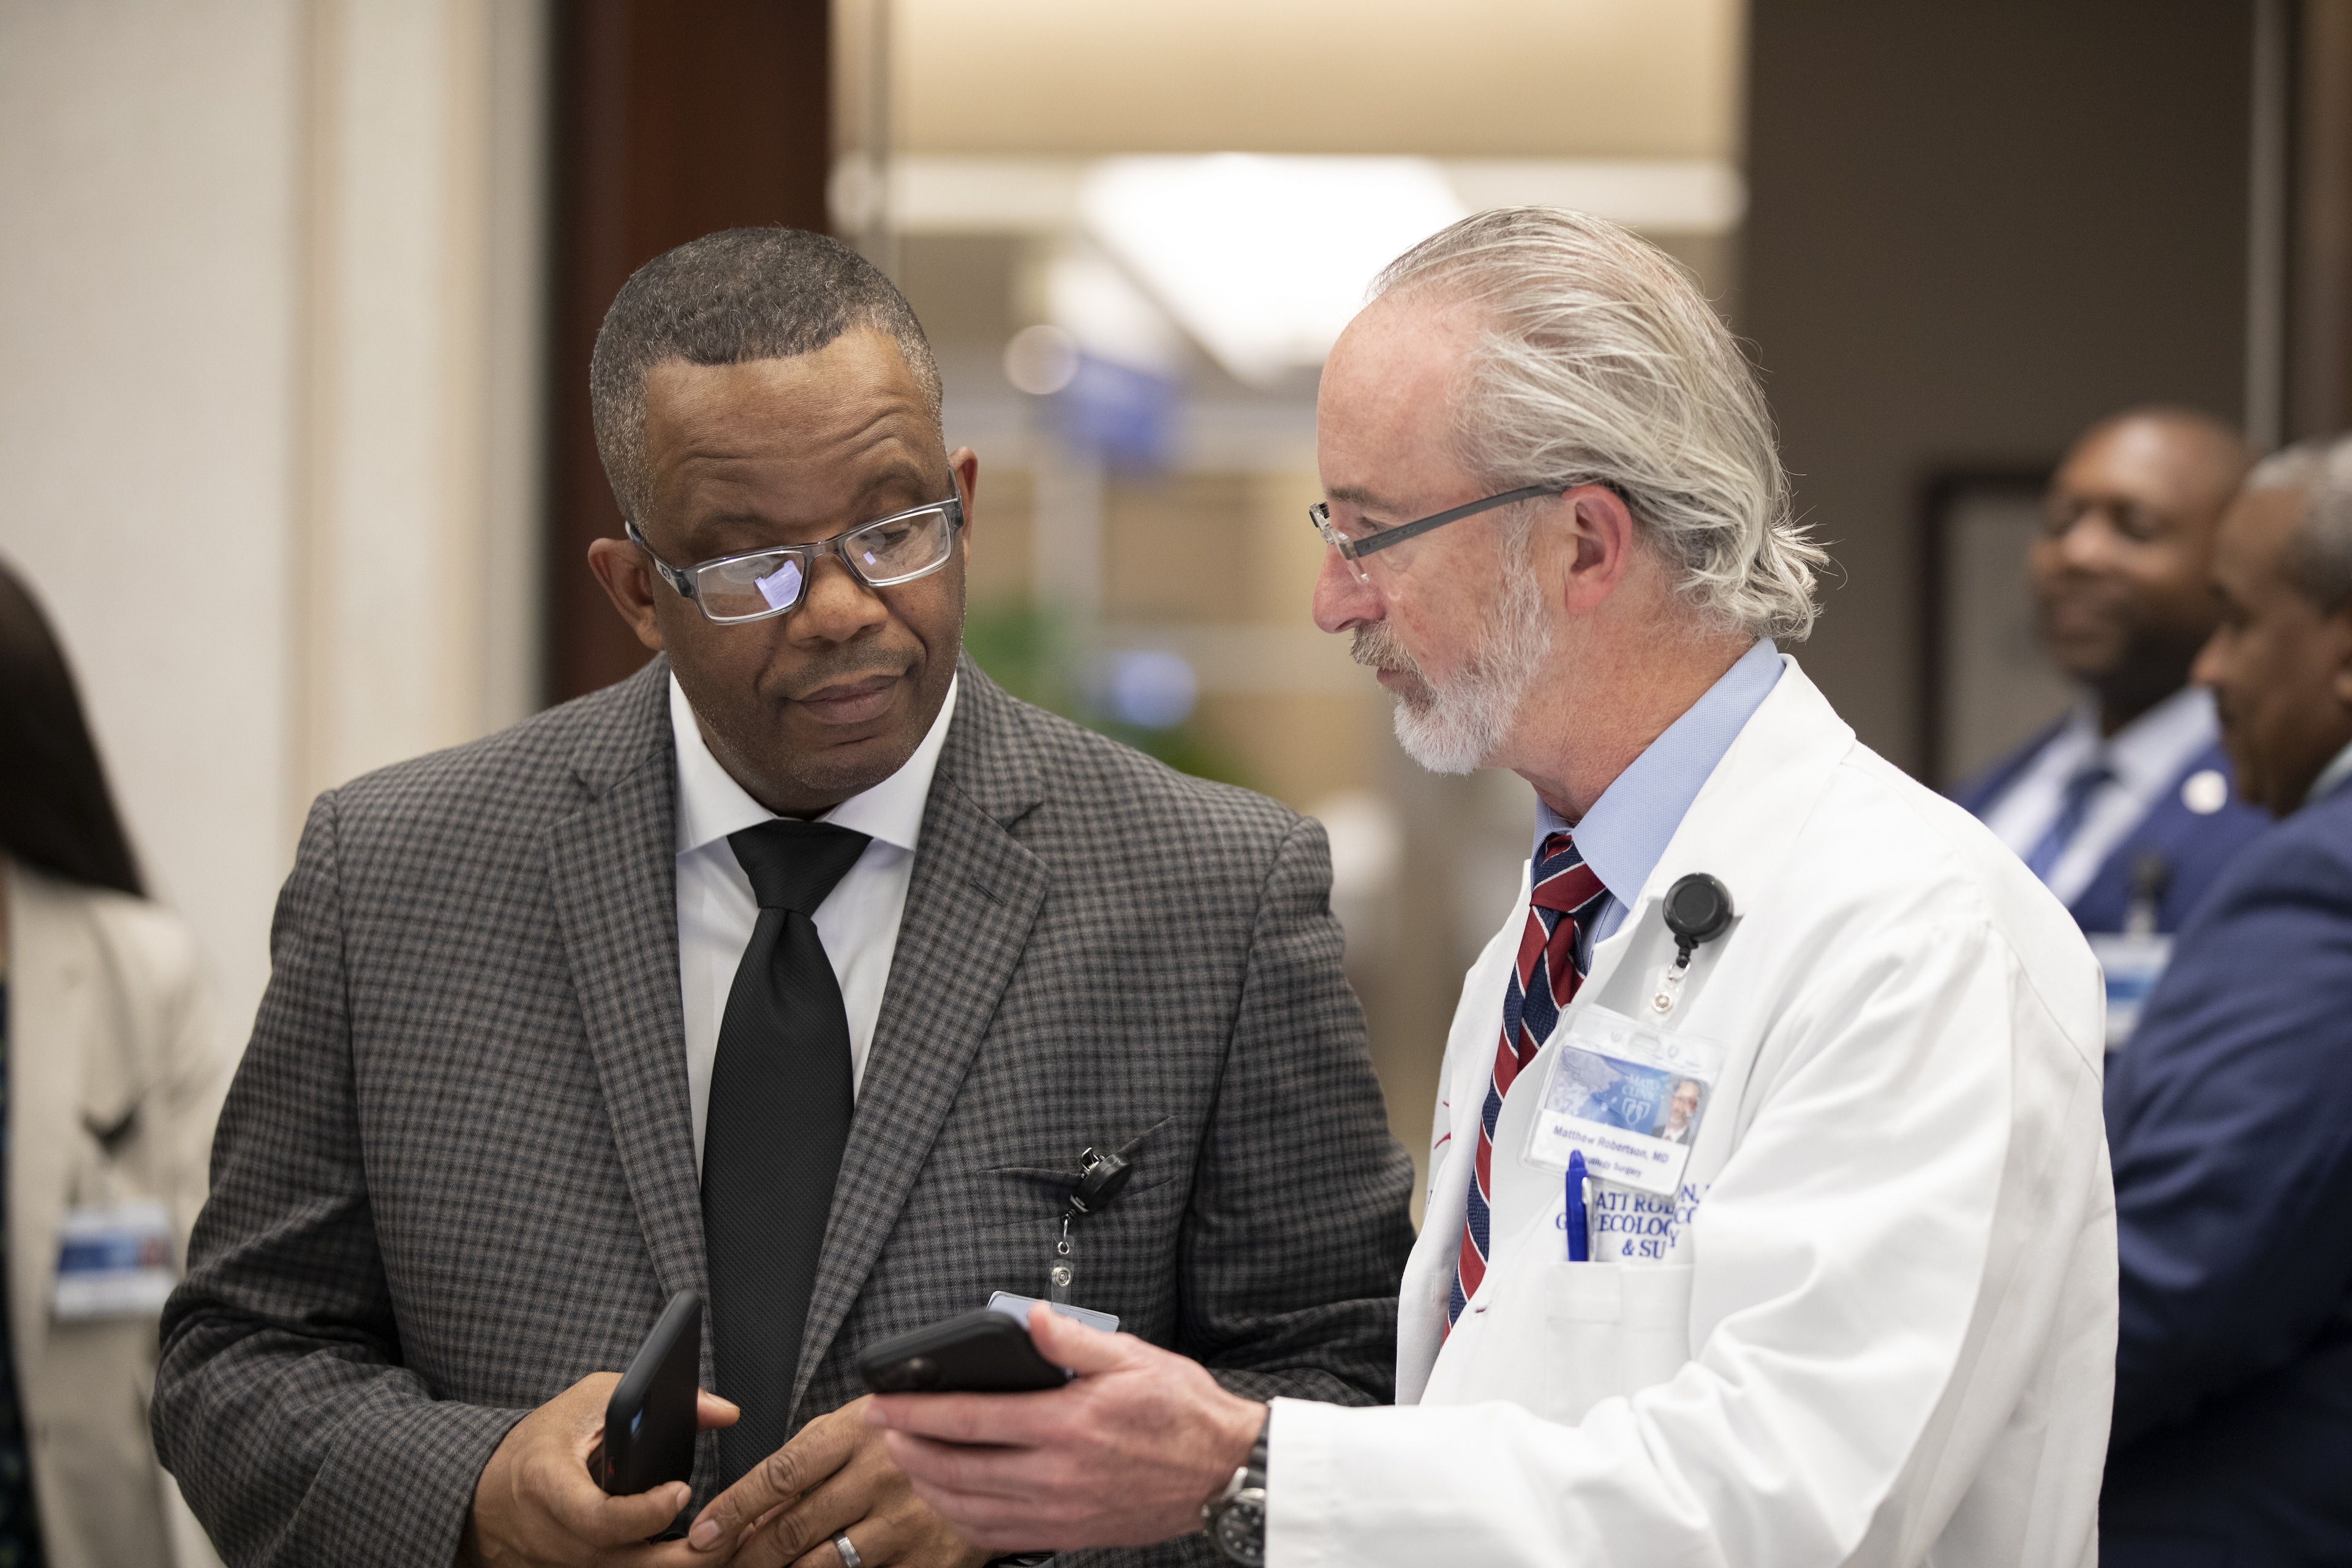 Two physicians at the Bariatric Center in Florida consult with one another on care.